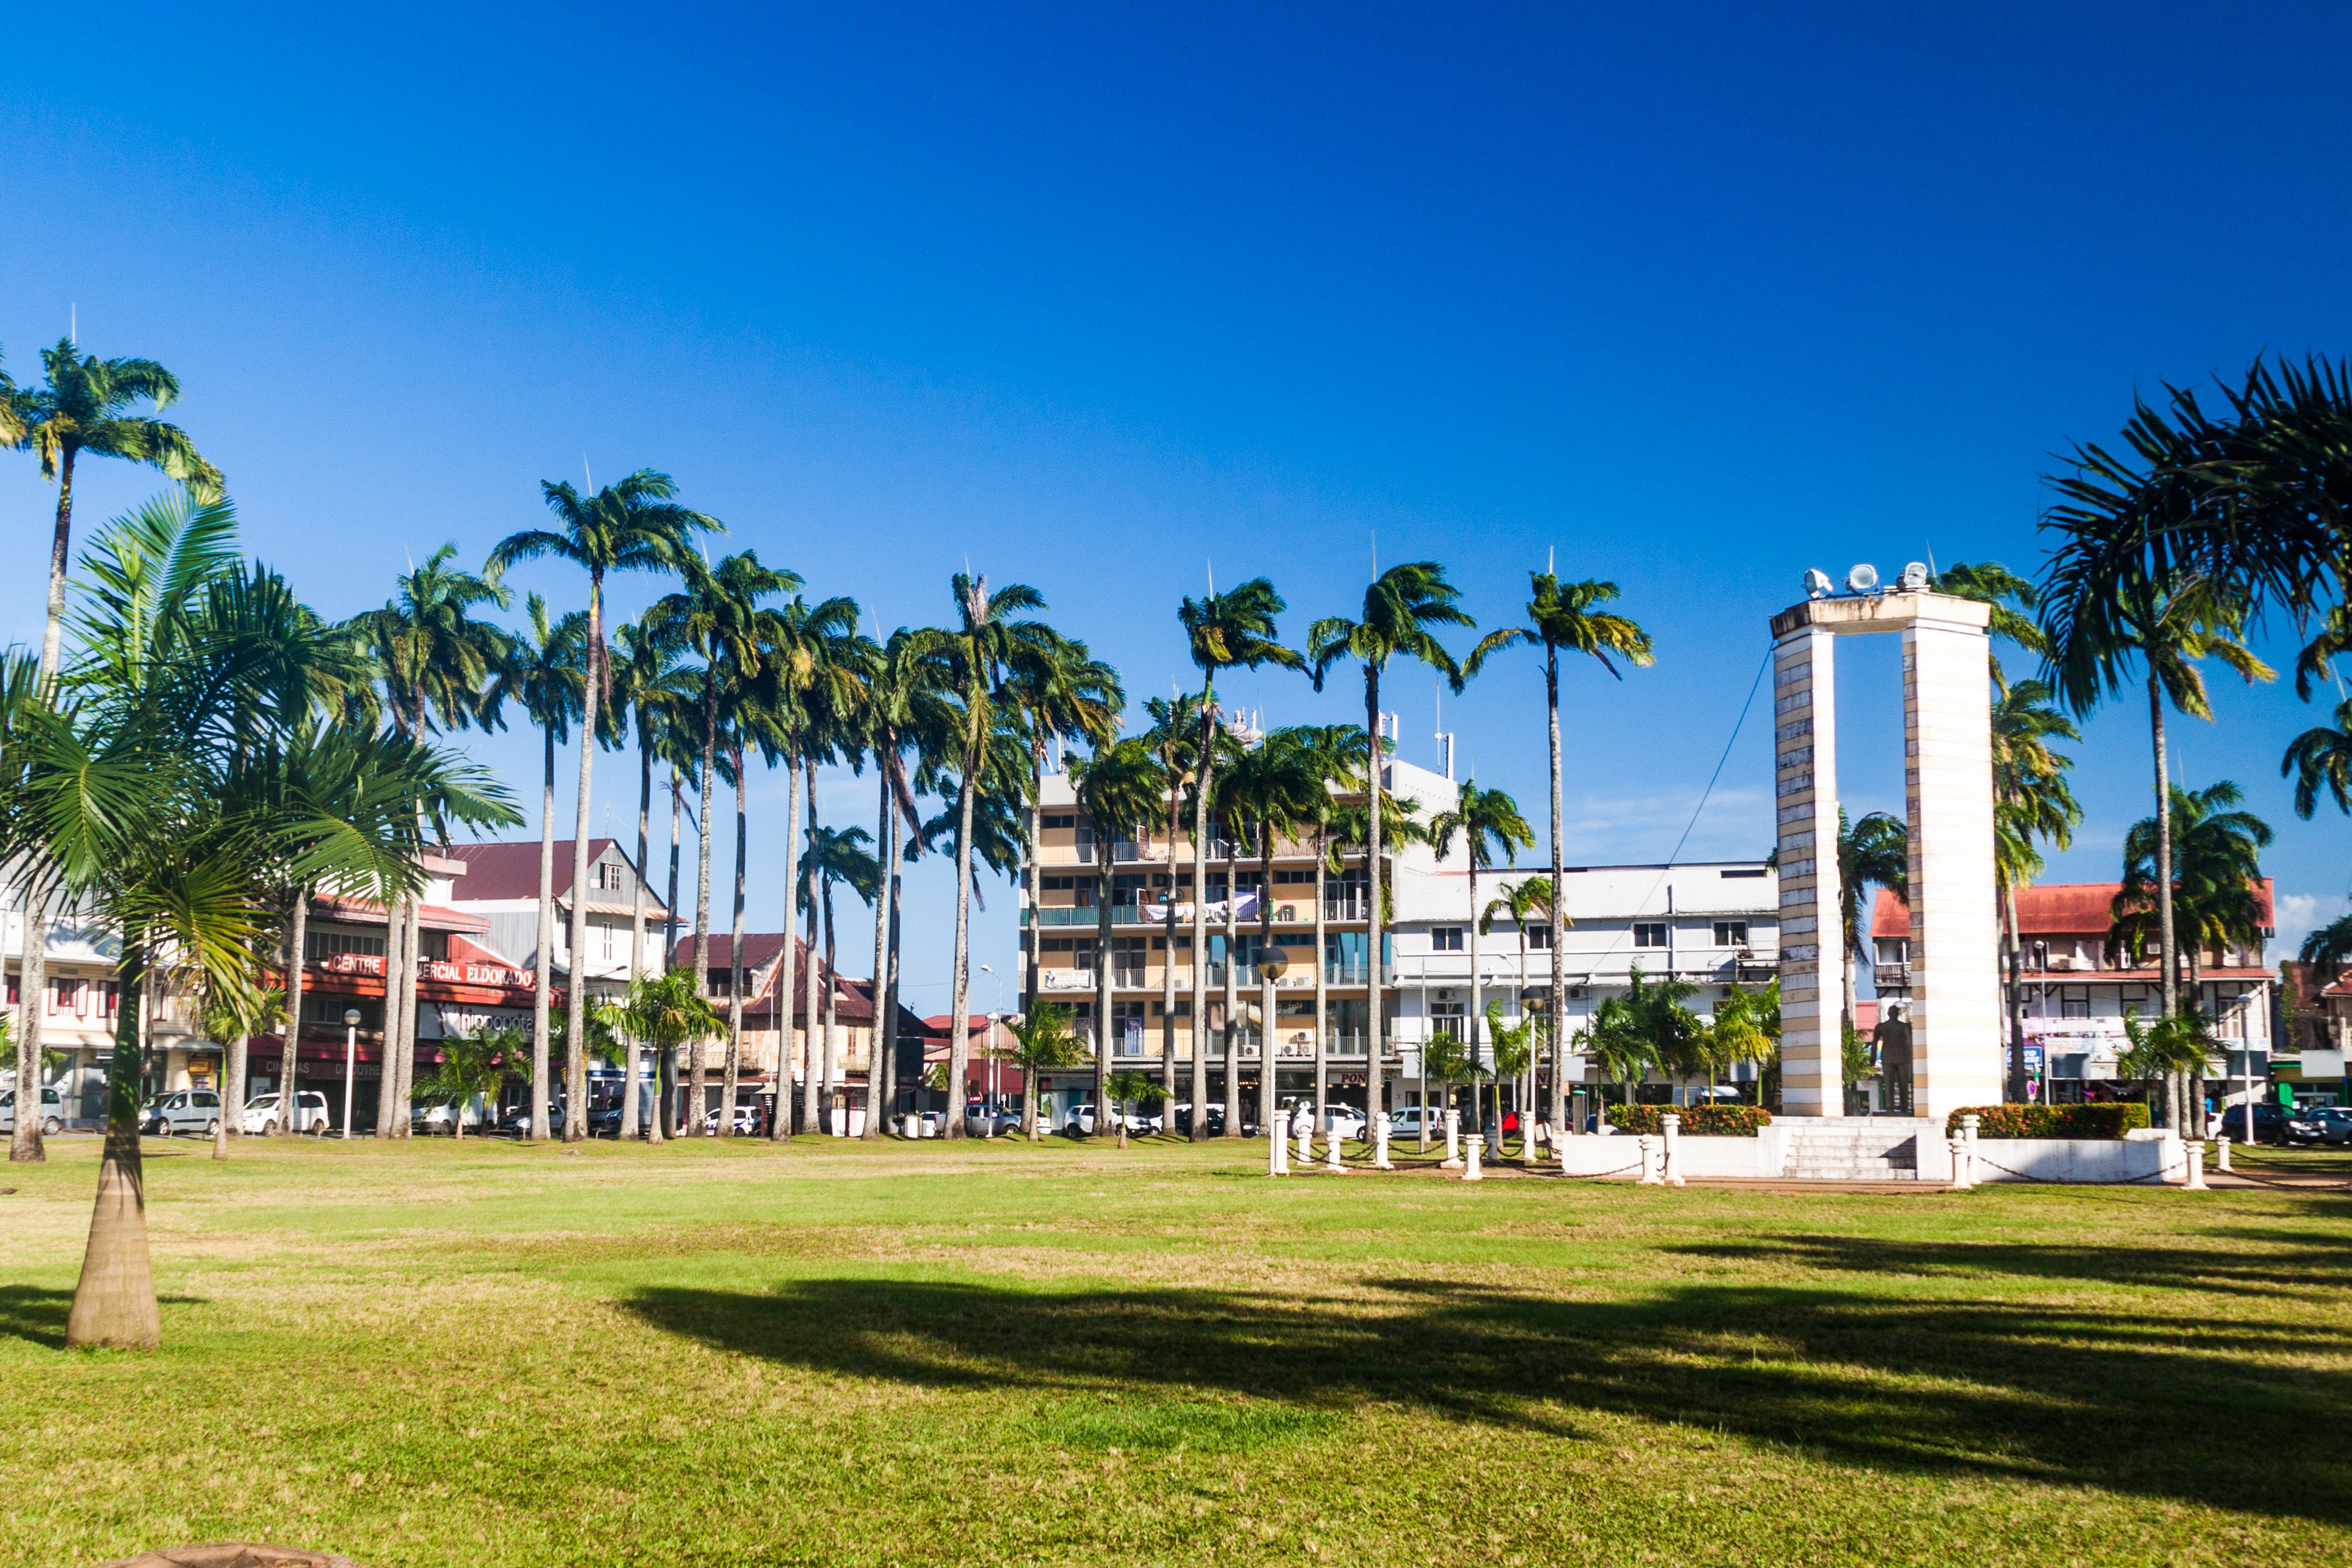 CAYENNE, FRENCH GUIANA - AUGUST 3, 2015: Place des Palmistes square in Cayenne, capital of French Guiana.